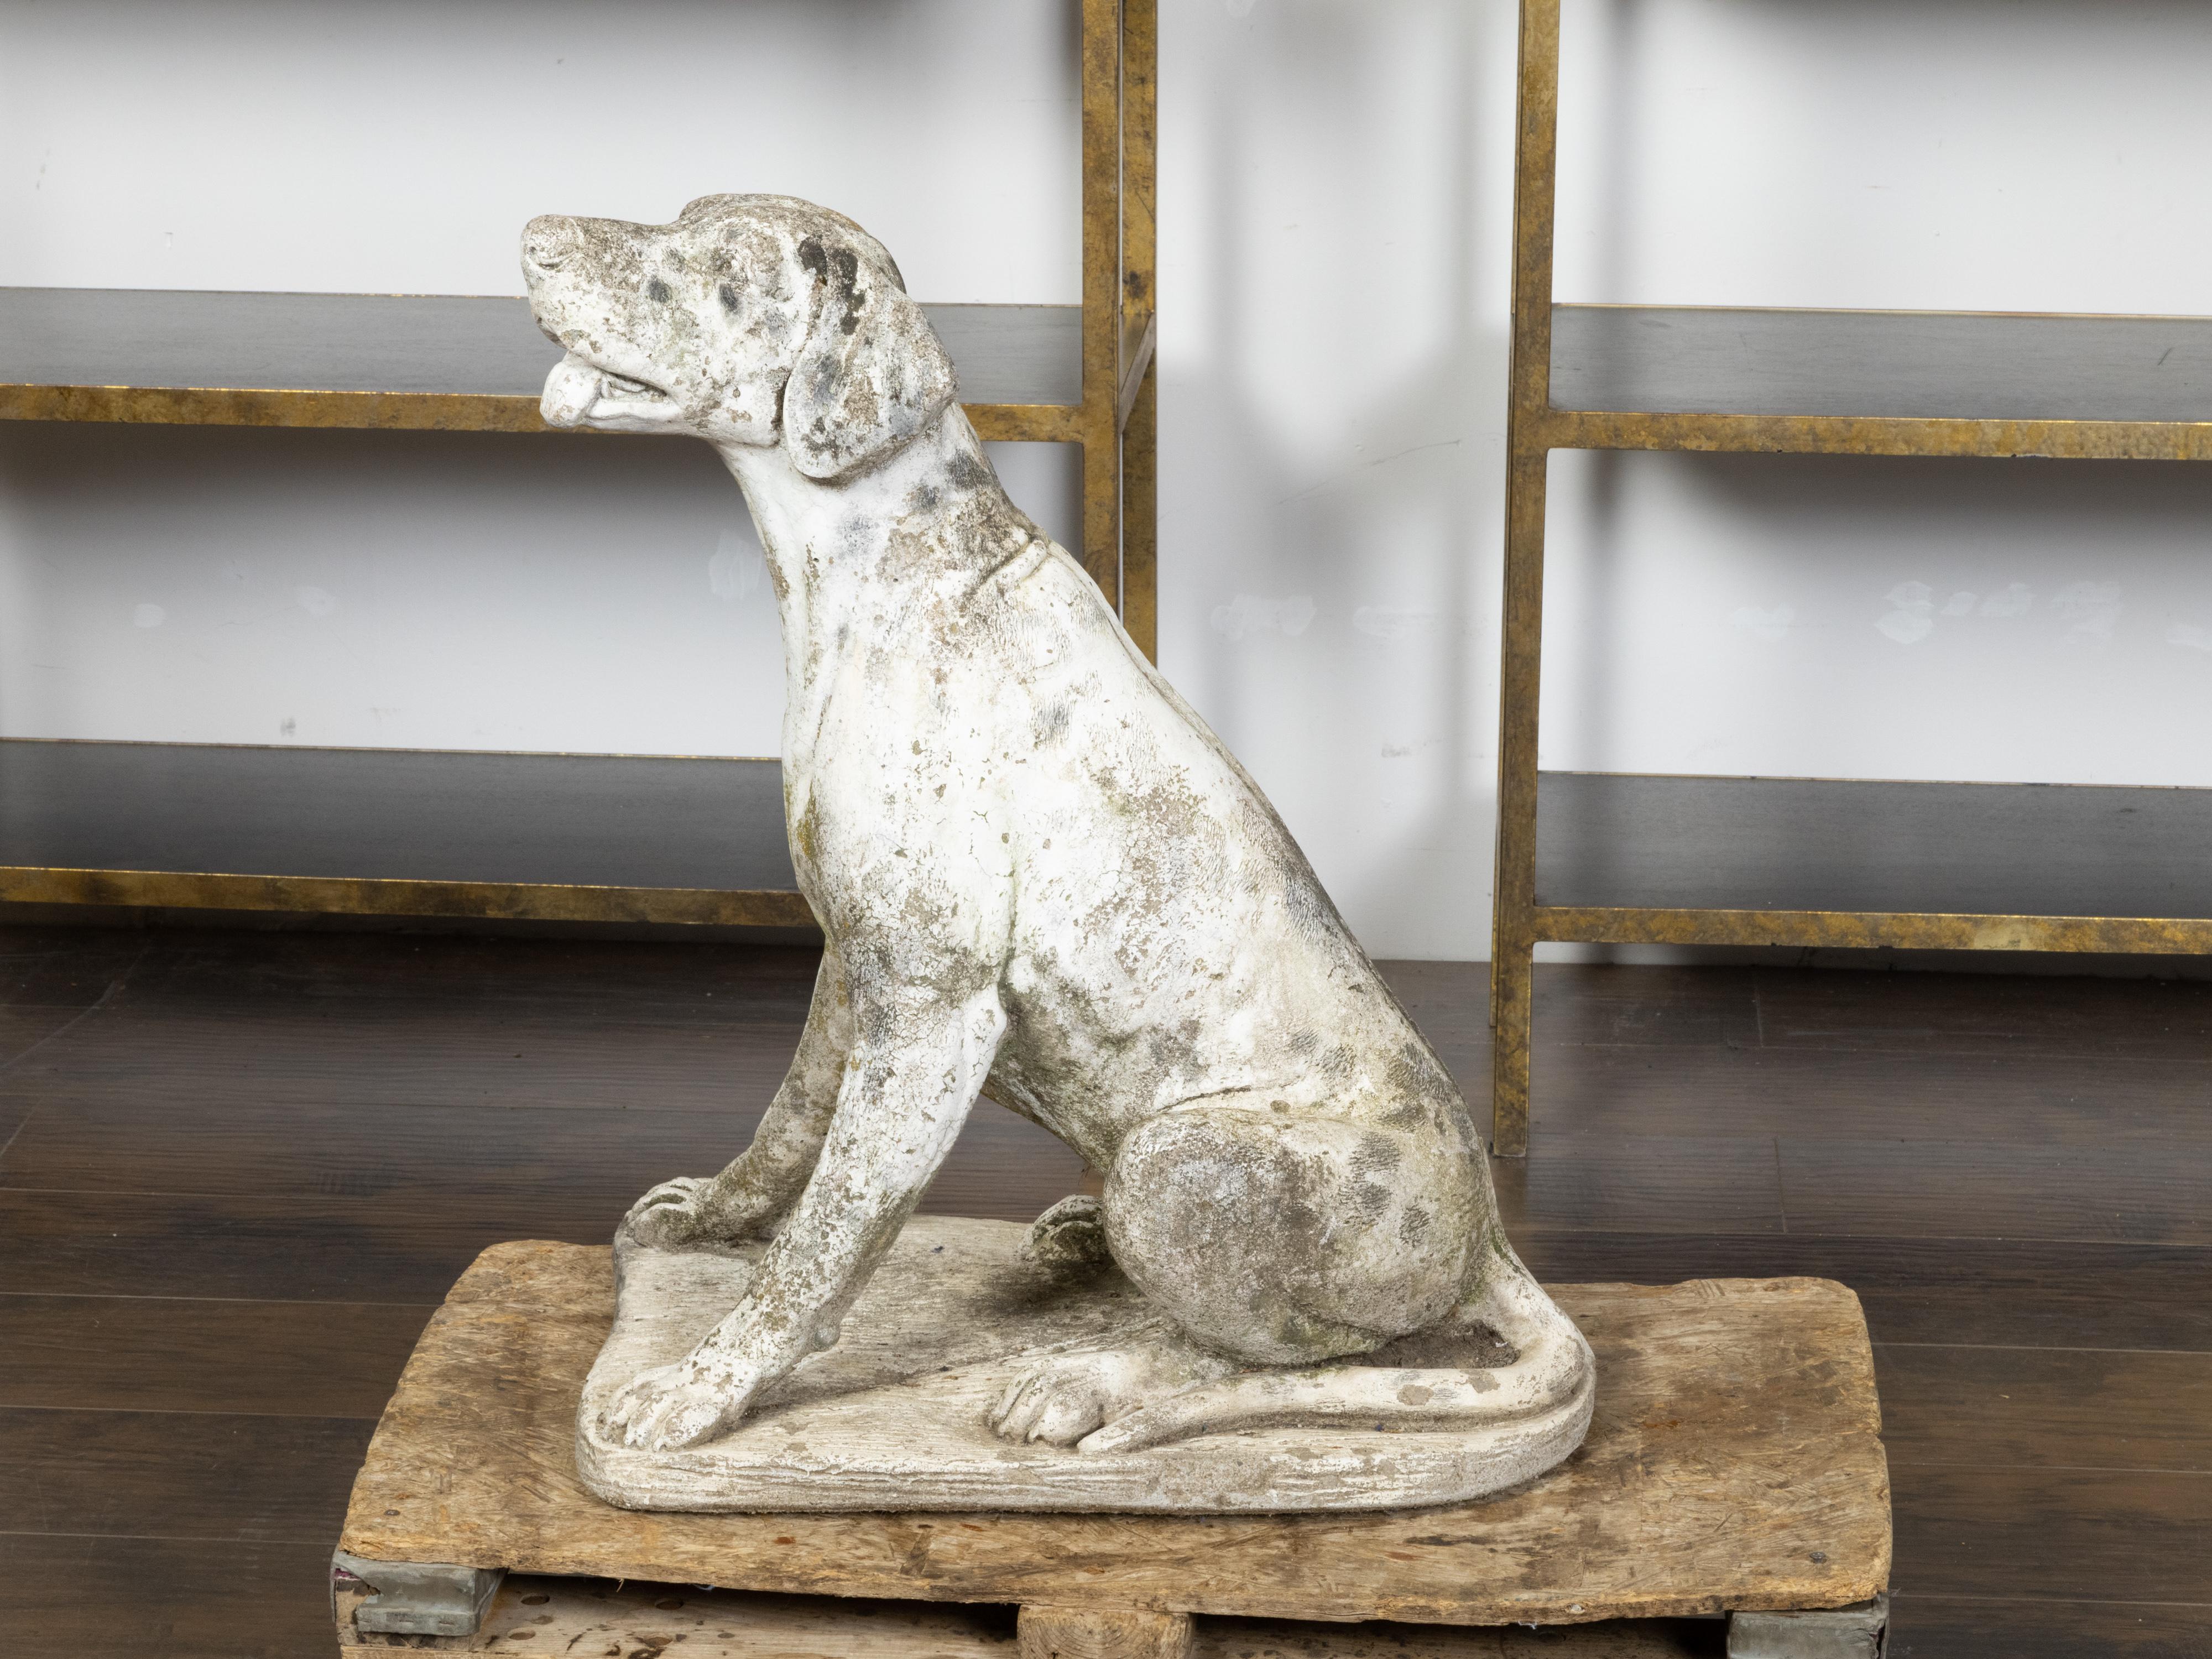 An English carved stone sculpture from the early 20th century depicting a sitting dog with nicely distressed patina. Created in England during the vibrant Roaring Twenties, this carved stone sculpture charms us with its depiction of a labrador-style